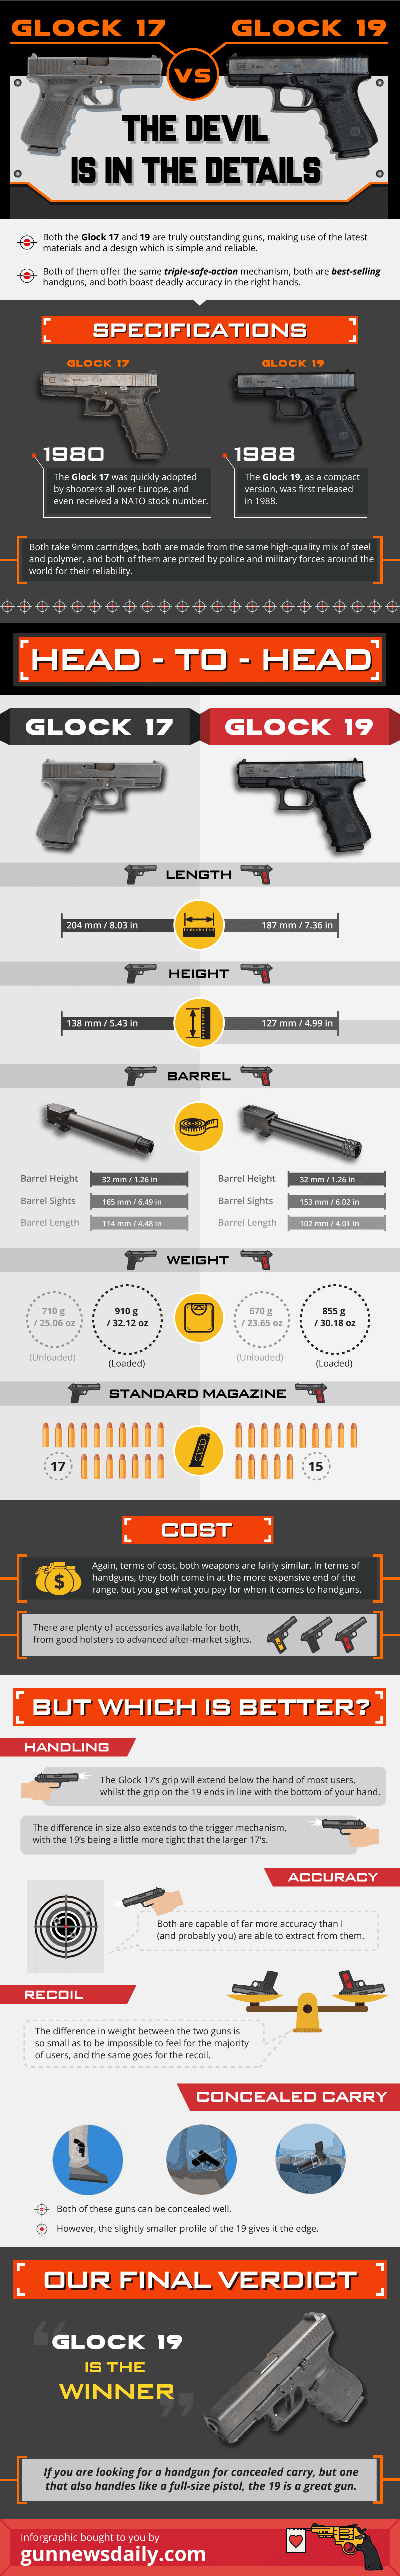 epic debate of the glock 19 versus glock 17 - compared side by side in an infographic